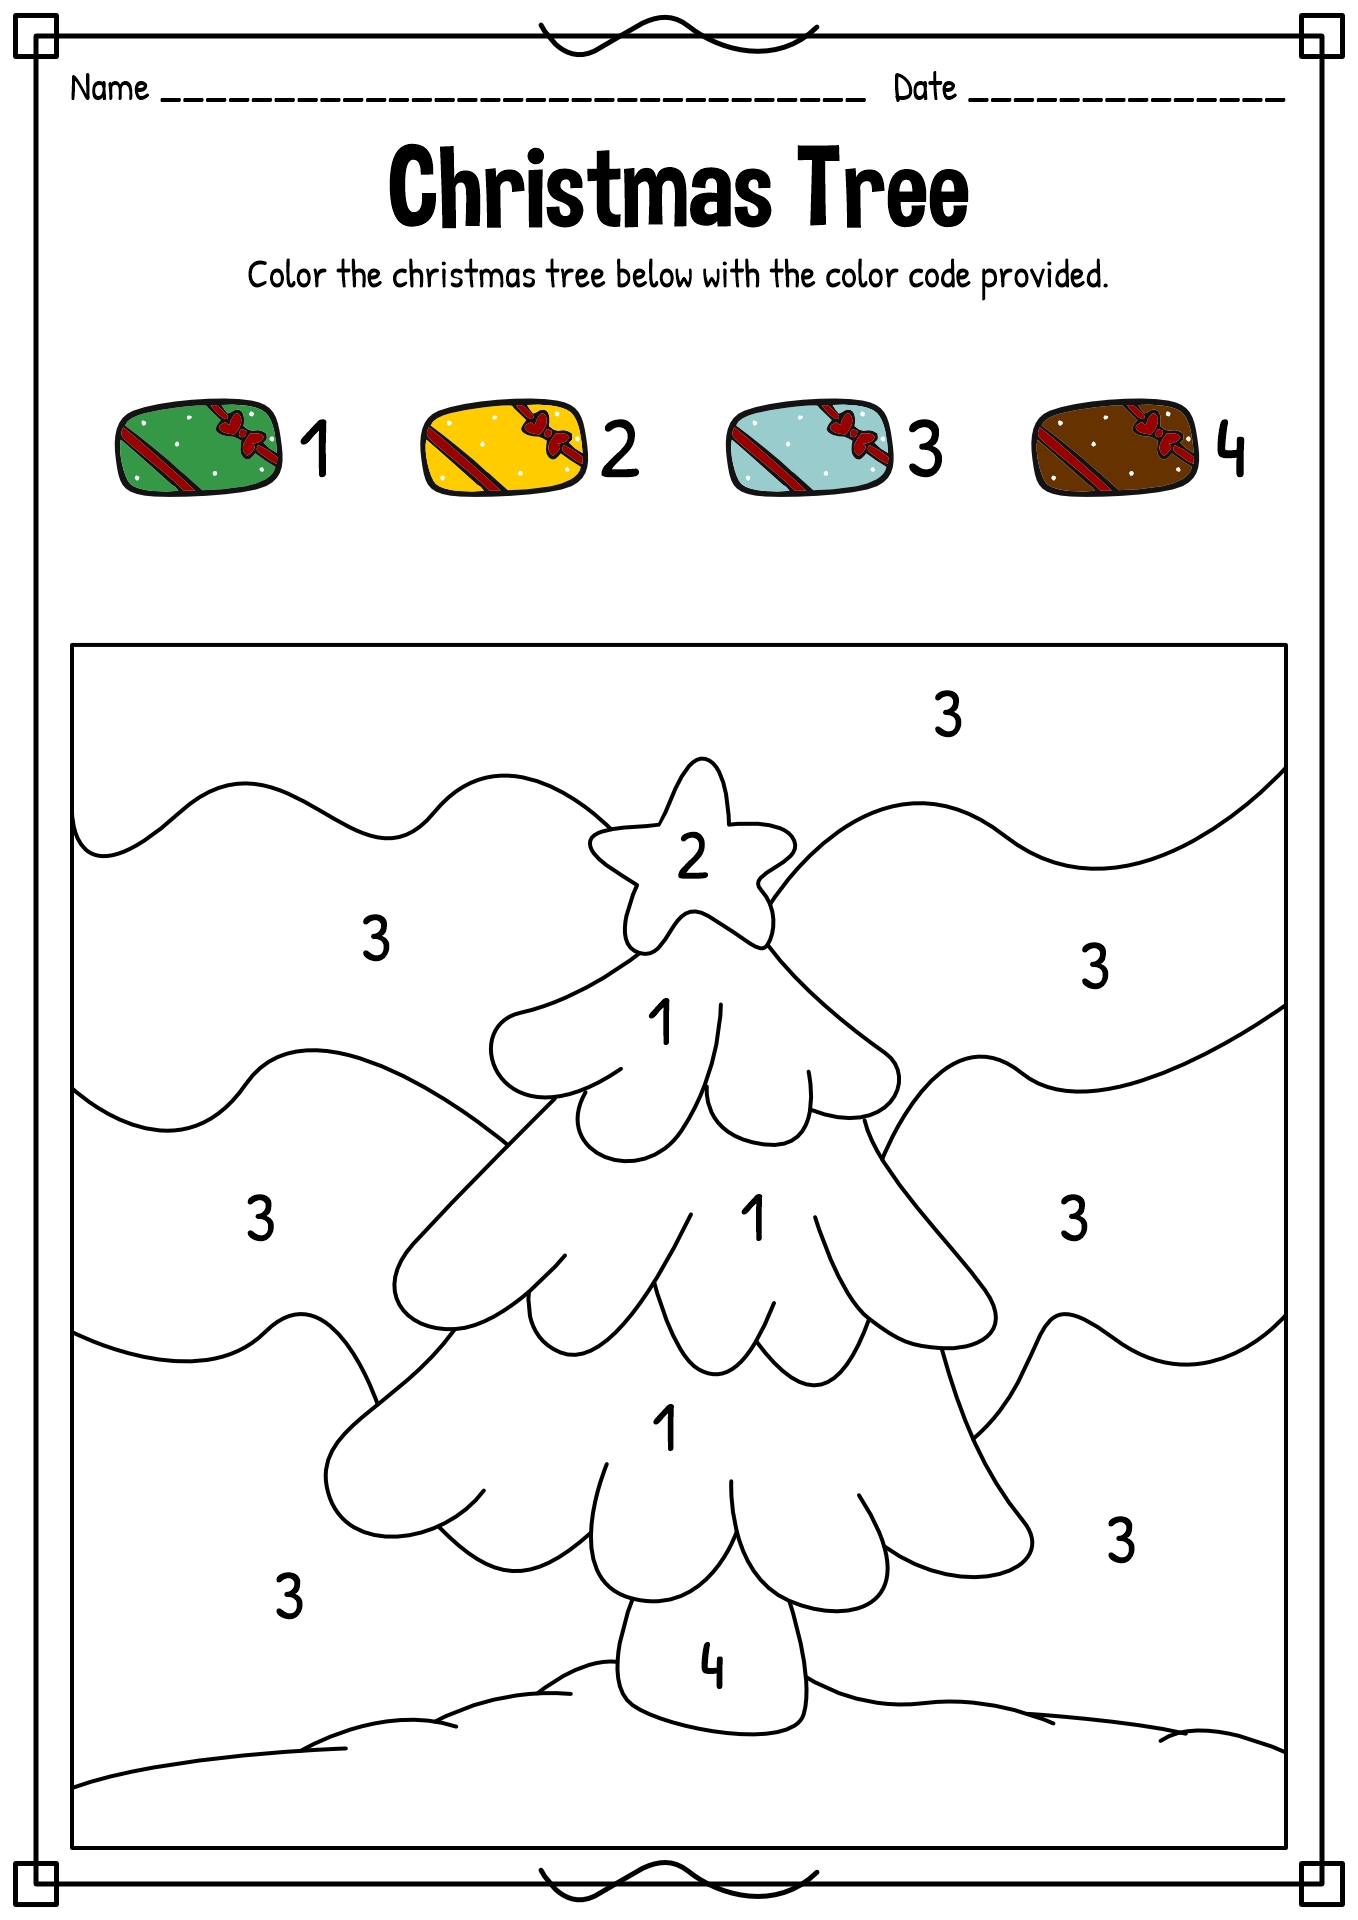 13 Best Images of Christmas Cutting Worksheets - Preschool Cutting ...